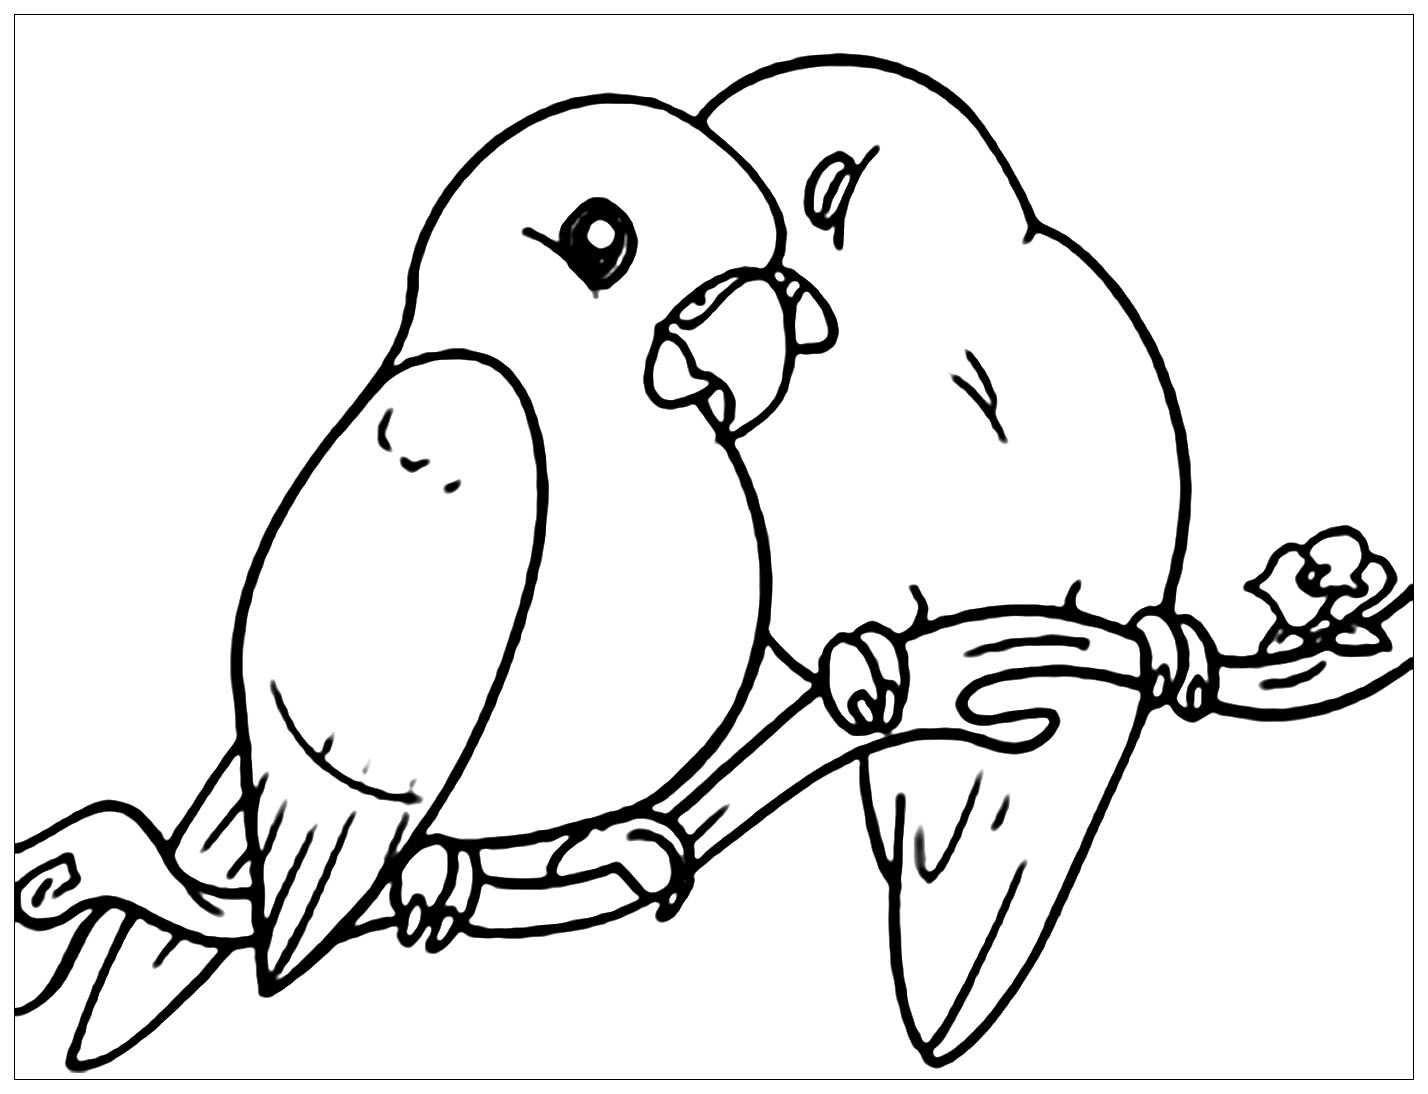 Birds to download - Birds Kids Coloring Pages